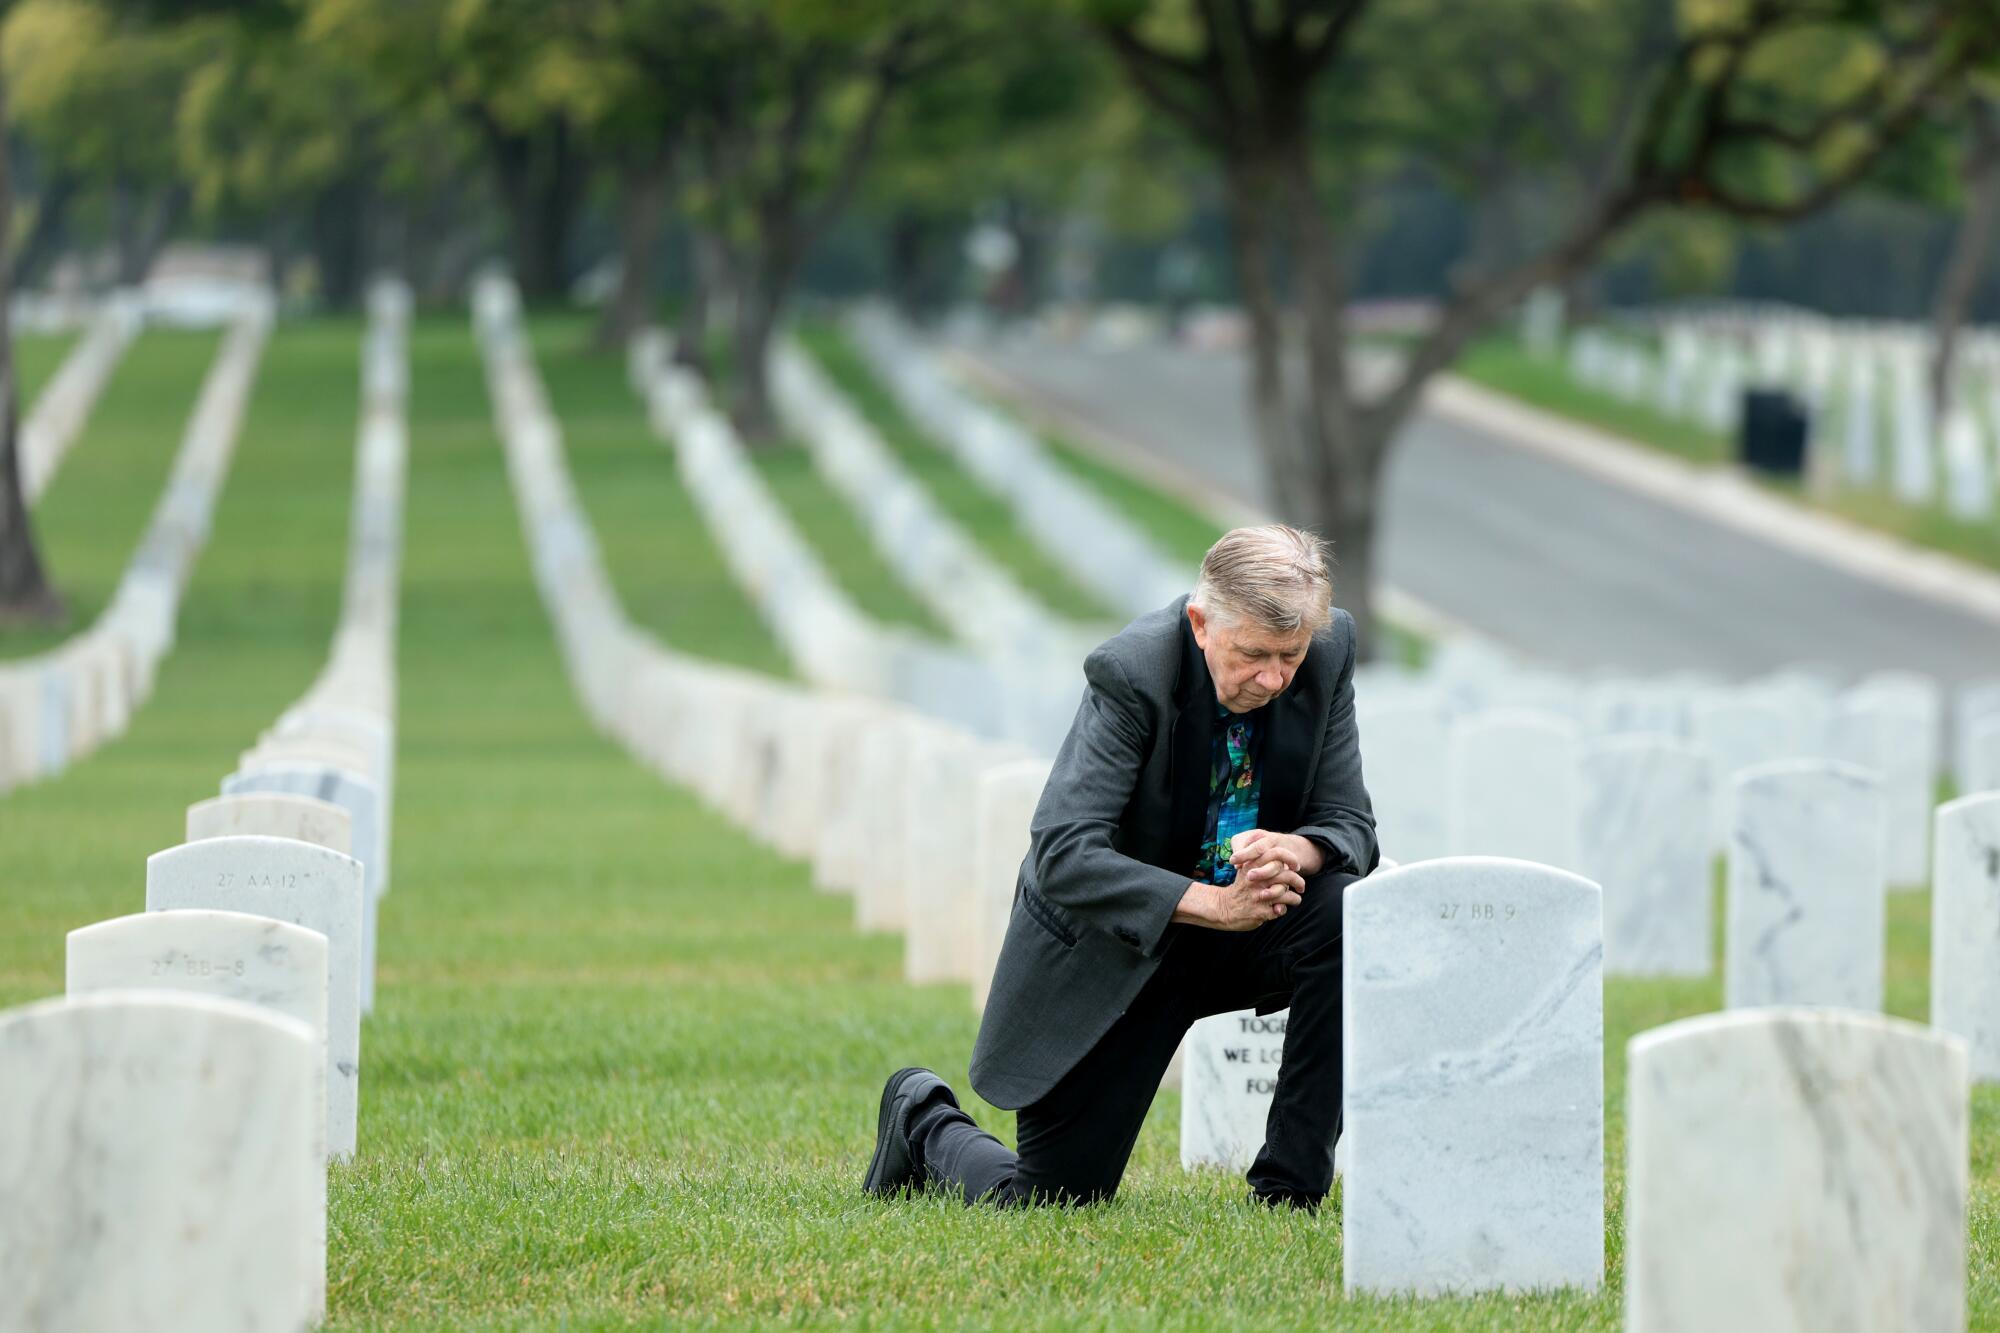 A man in a dark suit jacket kneeling in the grass, hands together, at one of hundreds of uniform white headstones